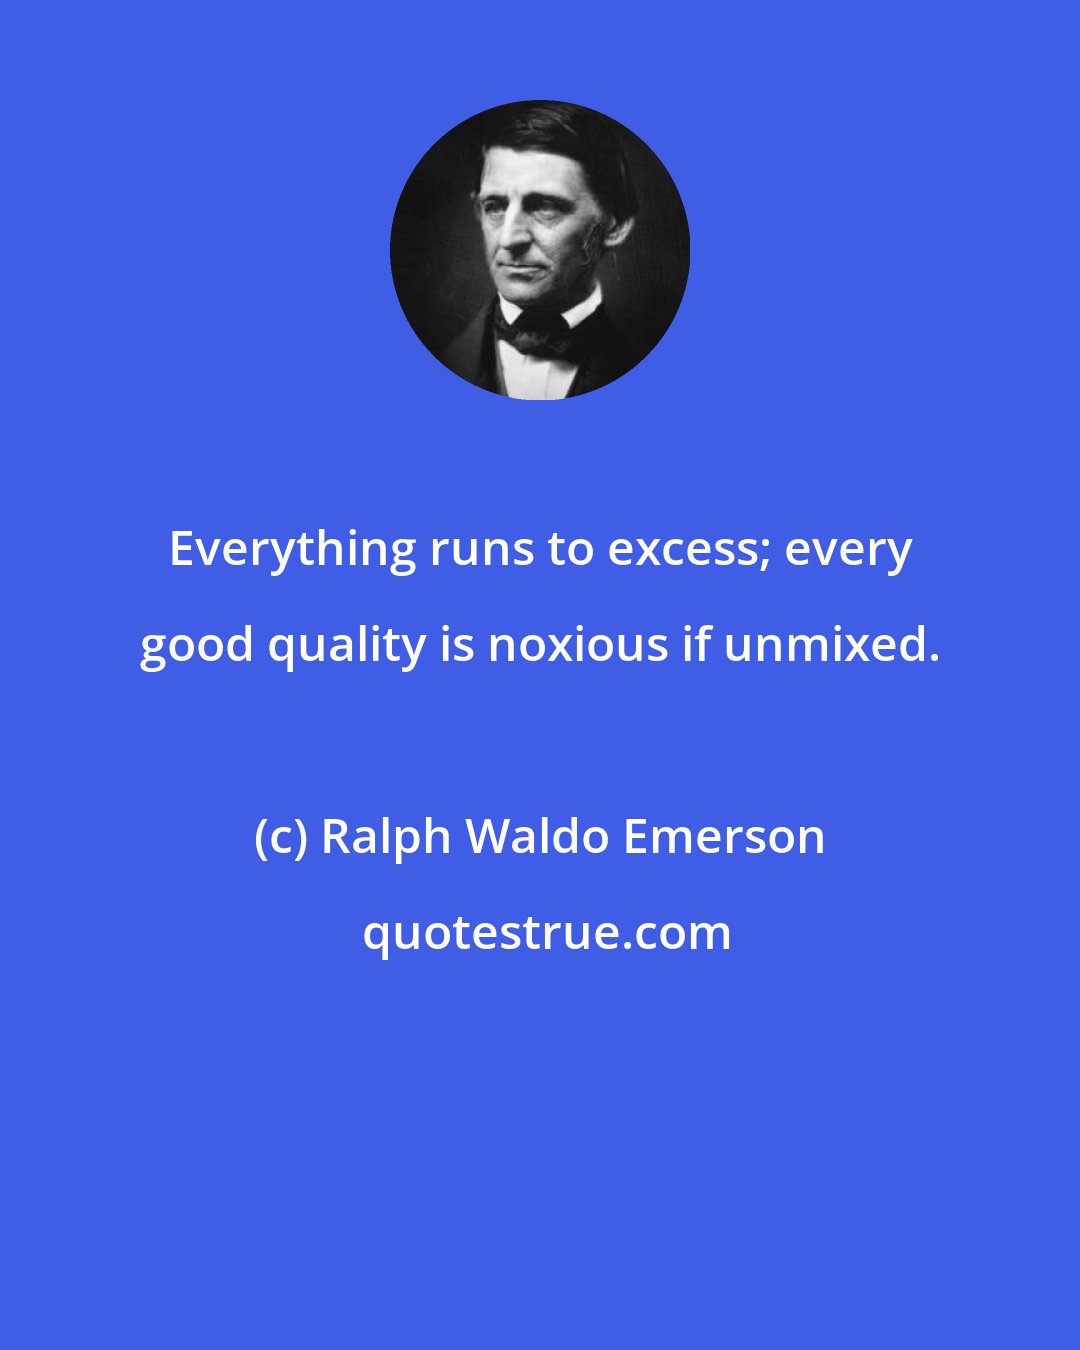 Ralph Waldo Emerson: Everything runs to excess; every good quality is noxious if unmixed.